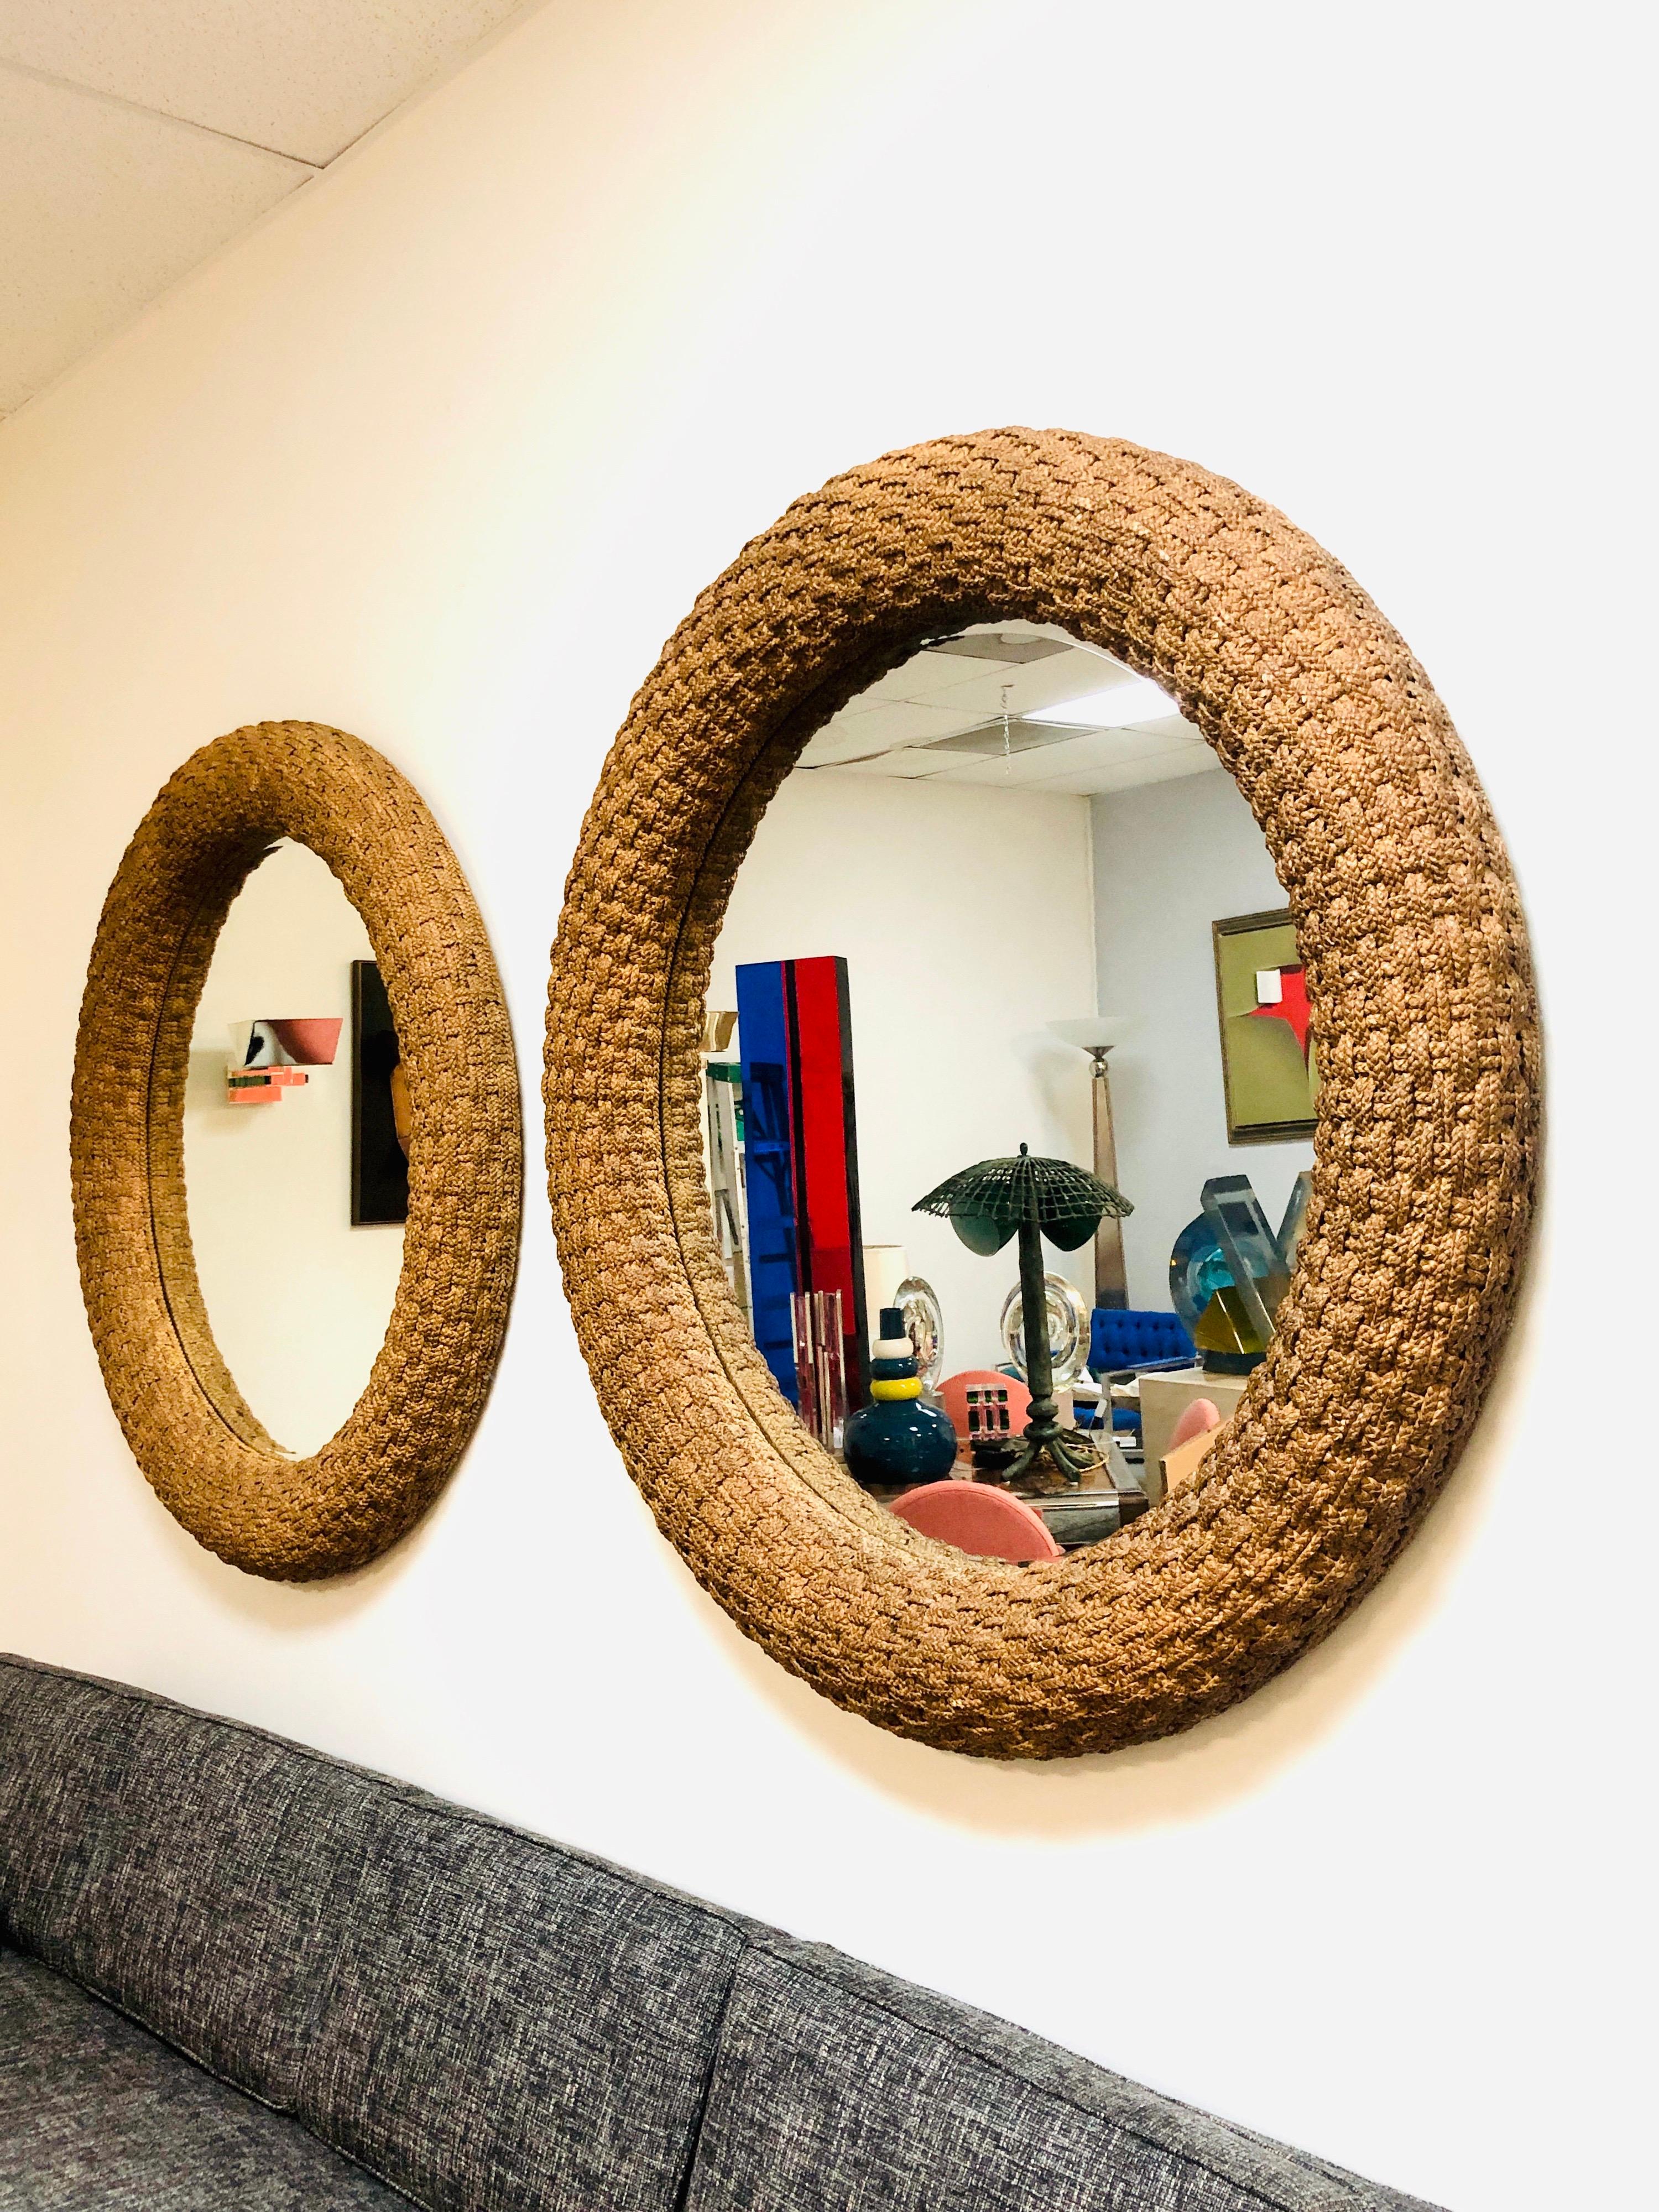 American Large Round Mirror with Braided Jute Frame, Pair Available, 1980s